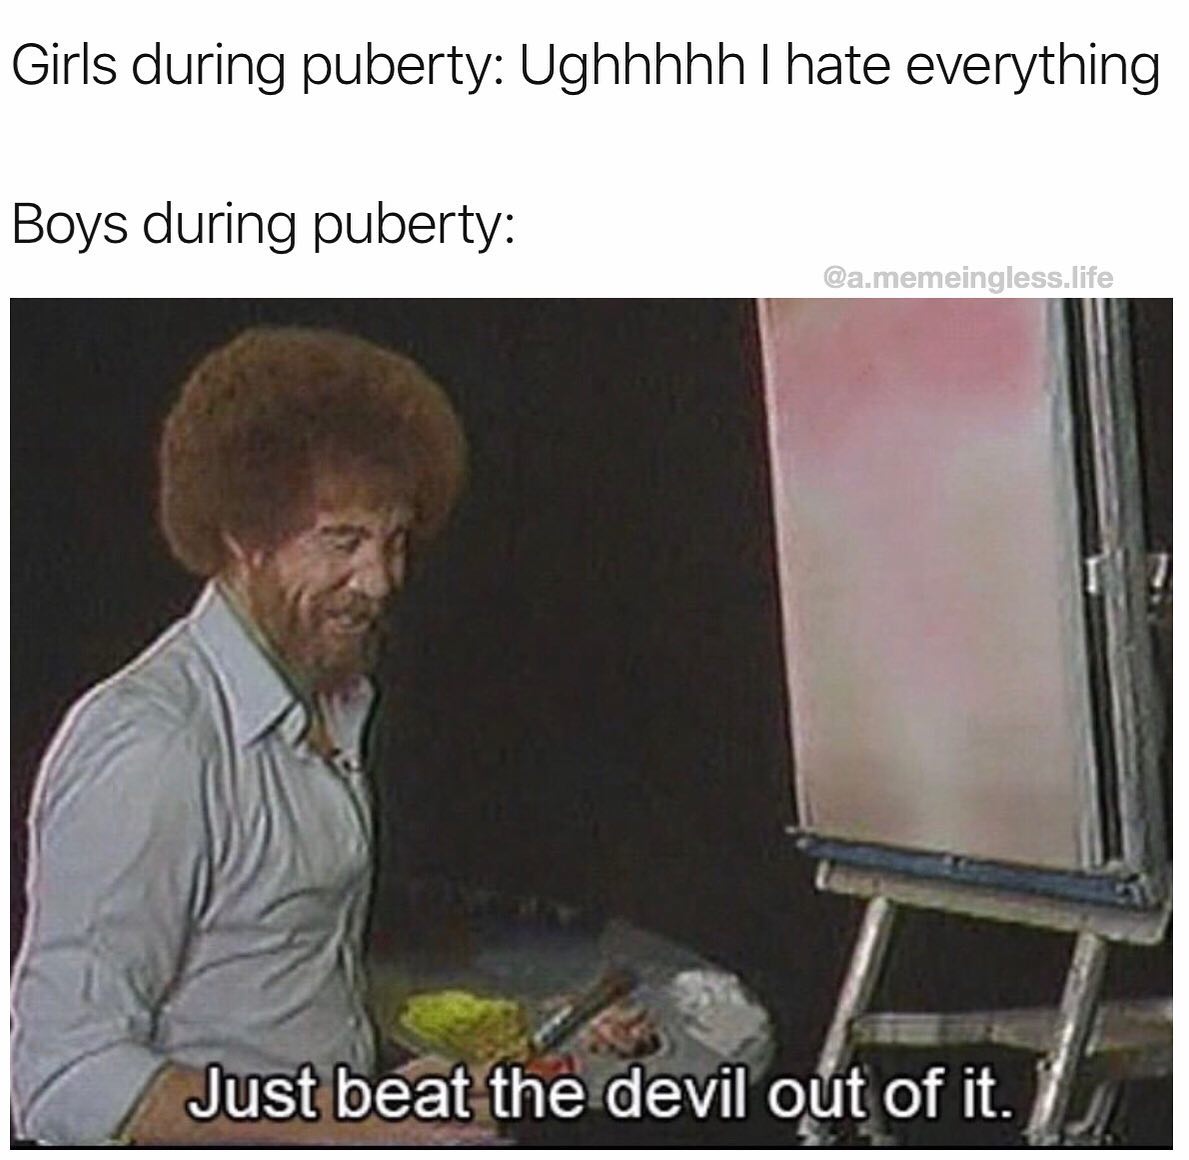 meme - Meme - Girls during puberty Ughhhhh I hate everything Boys during puberty .memeingless.life Just beat the devil out of it.